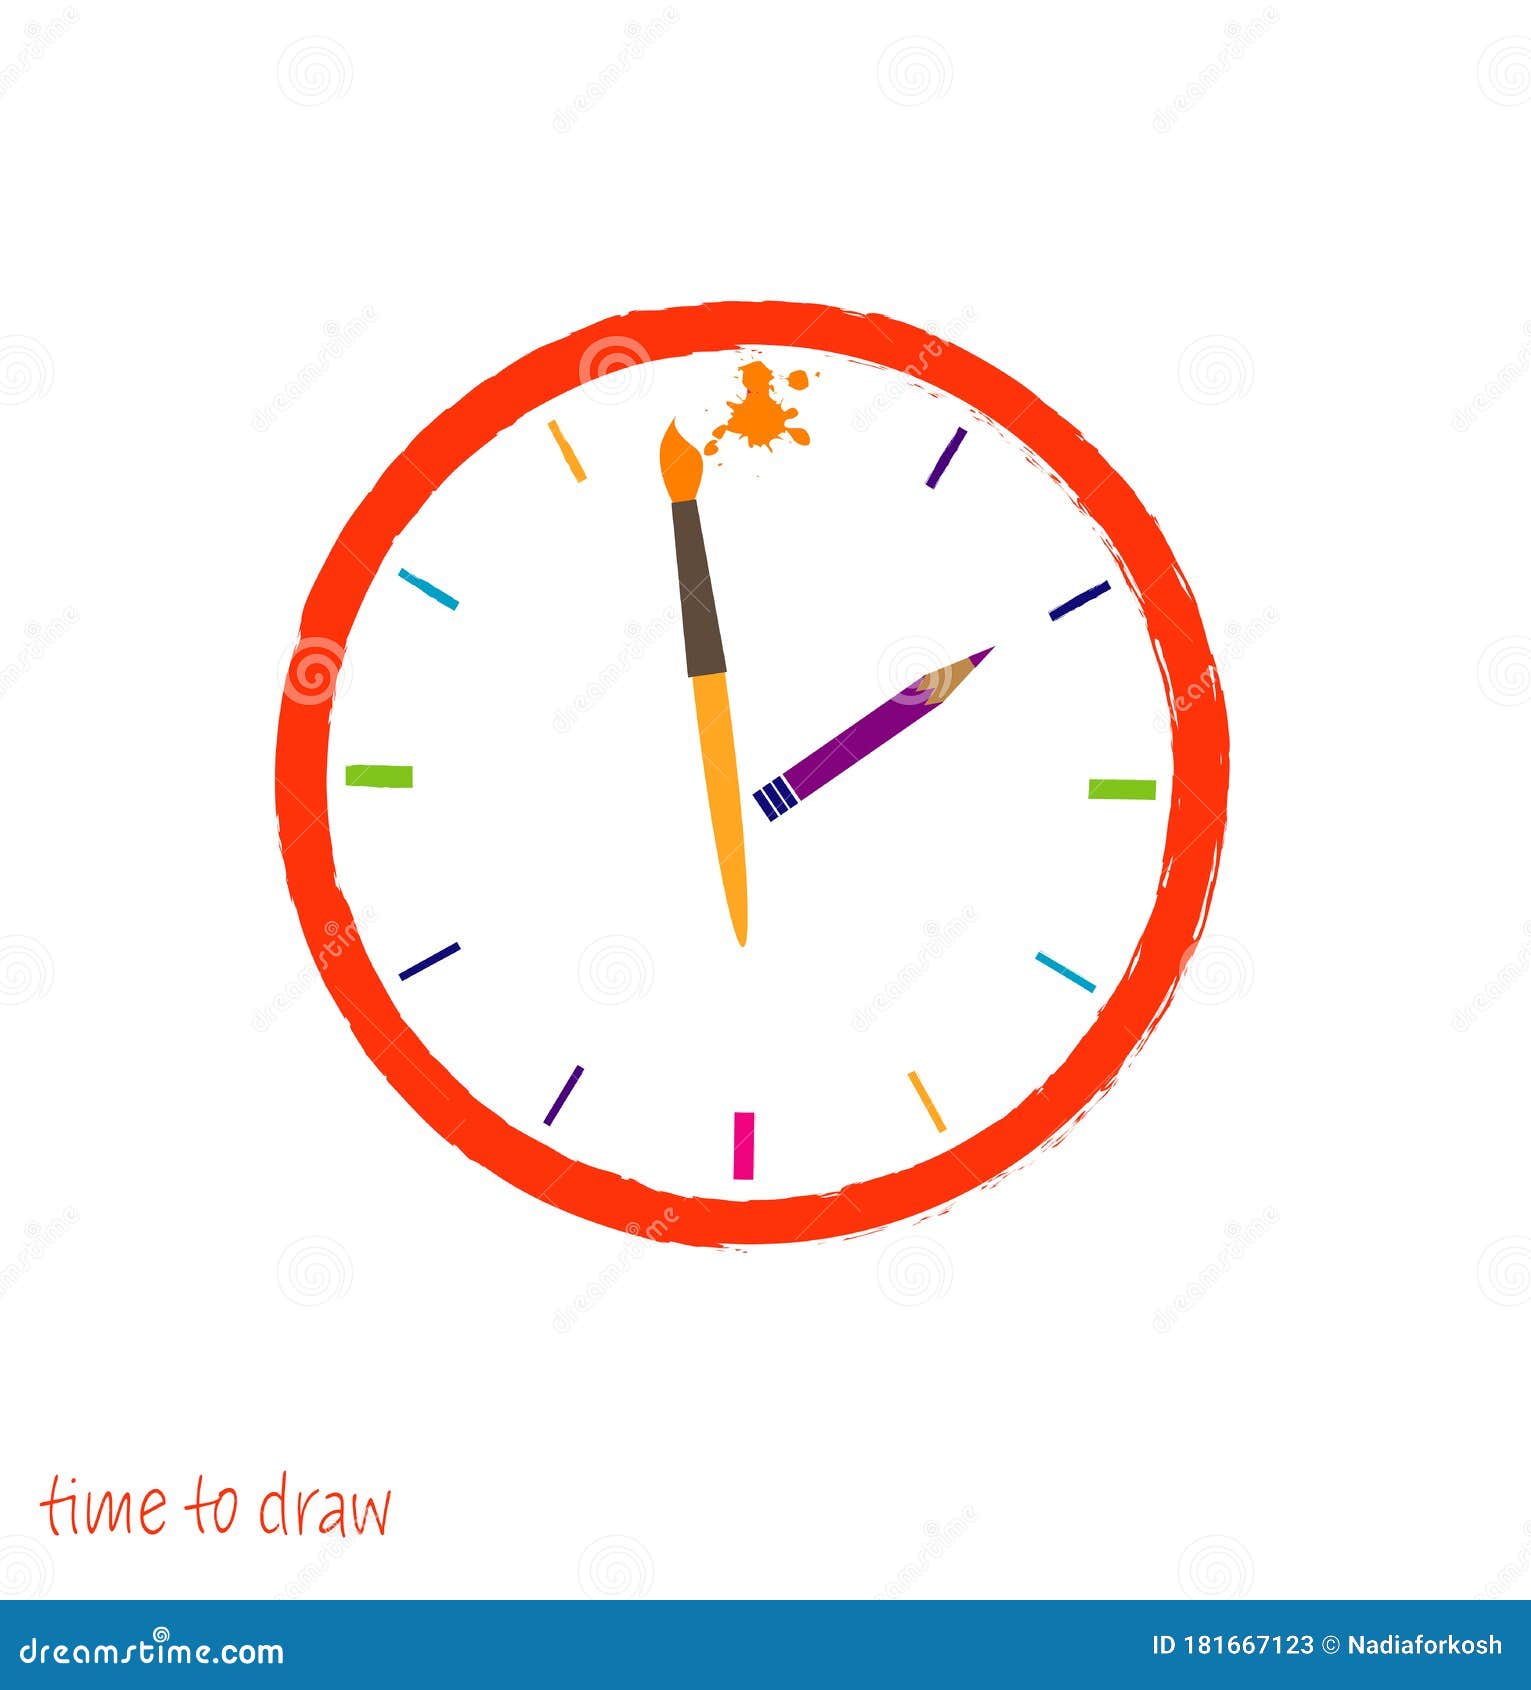 How to draw a Wall Clock step by step for beginners - YouTube